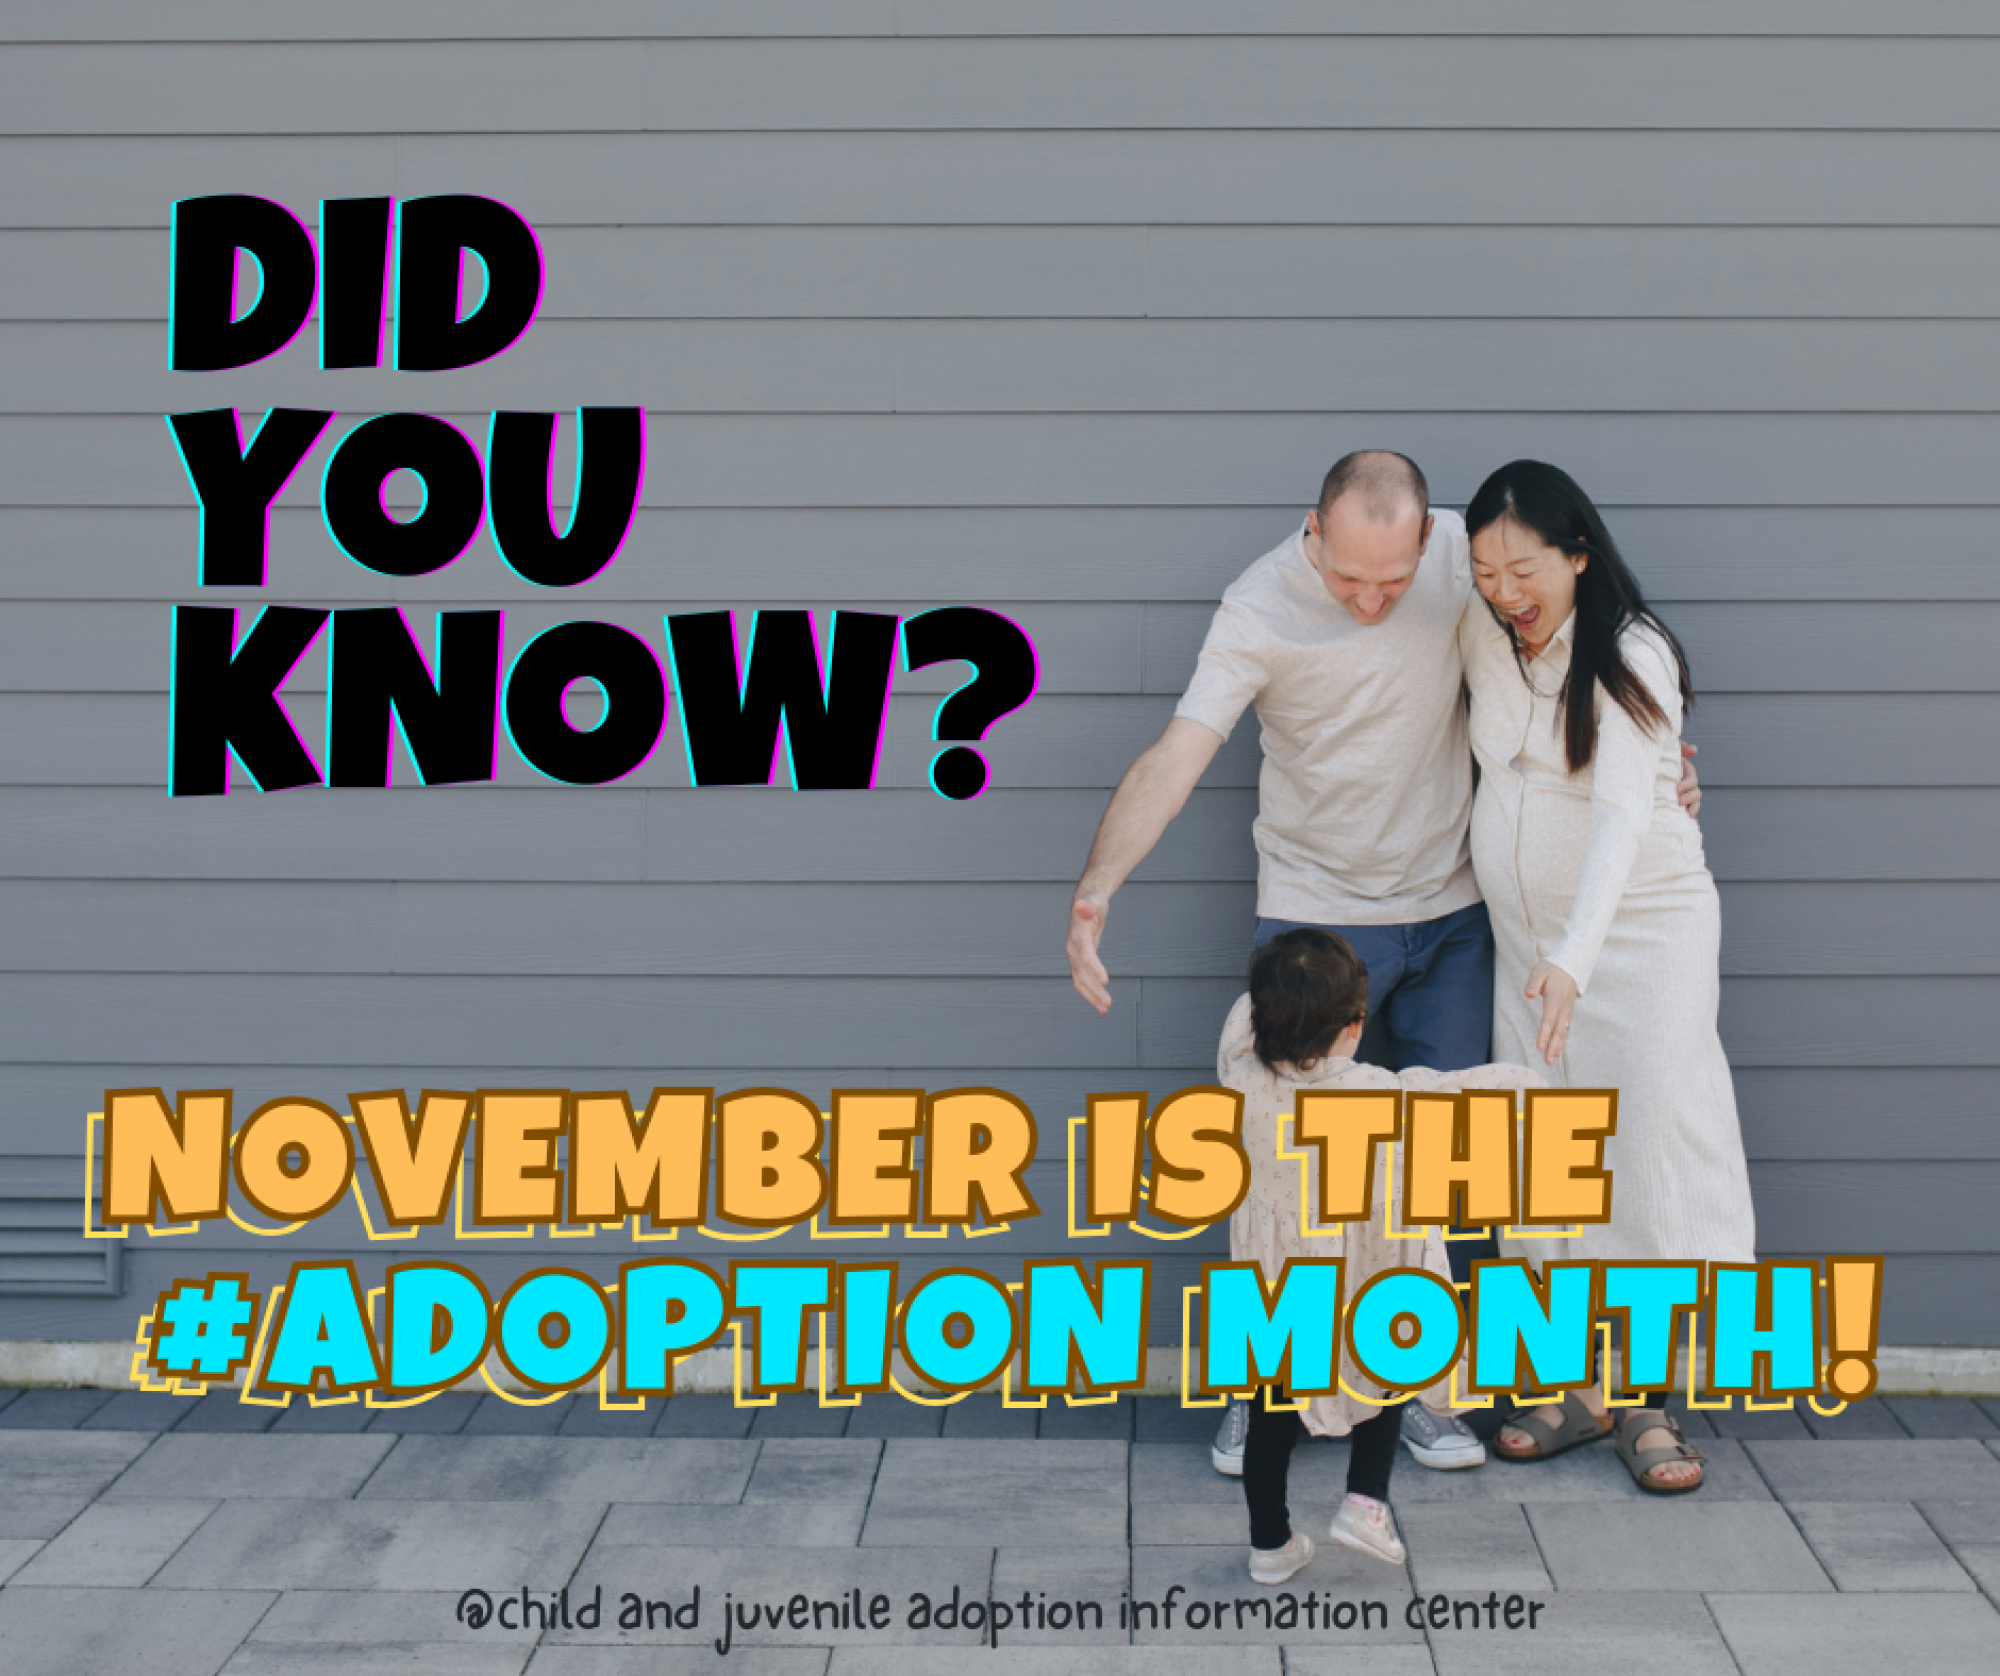 Its the Adoption Month!